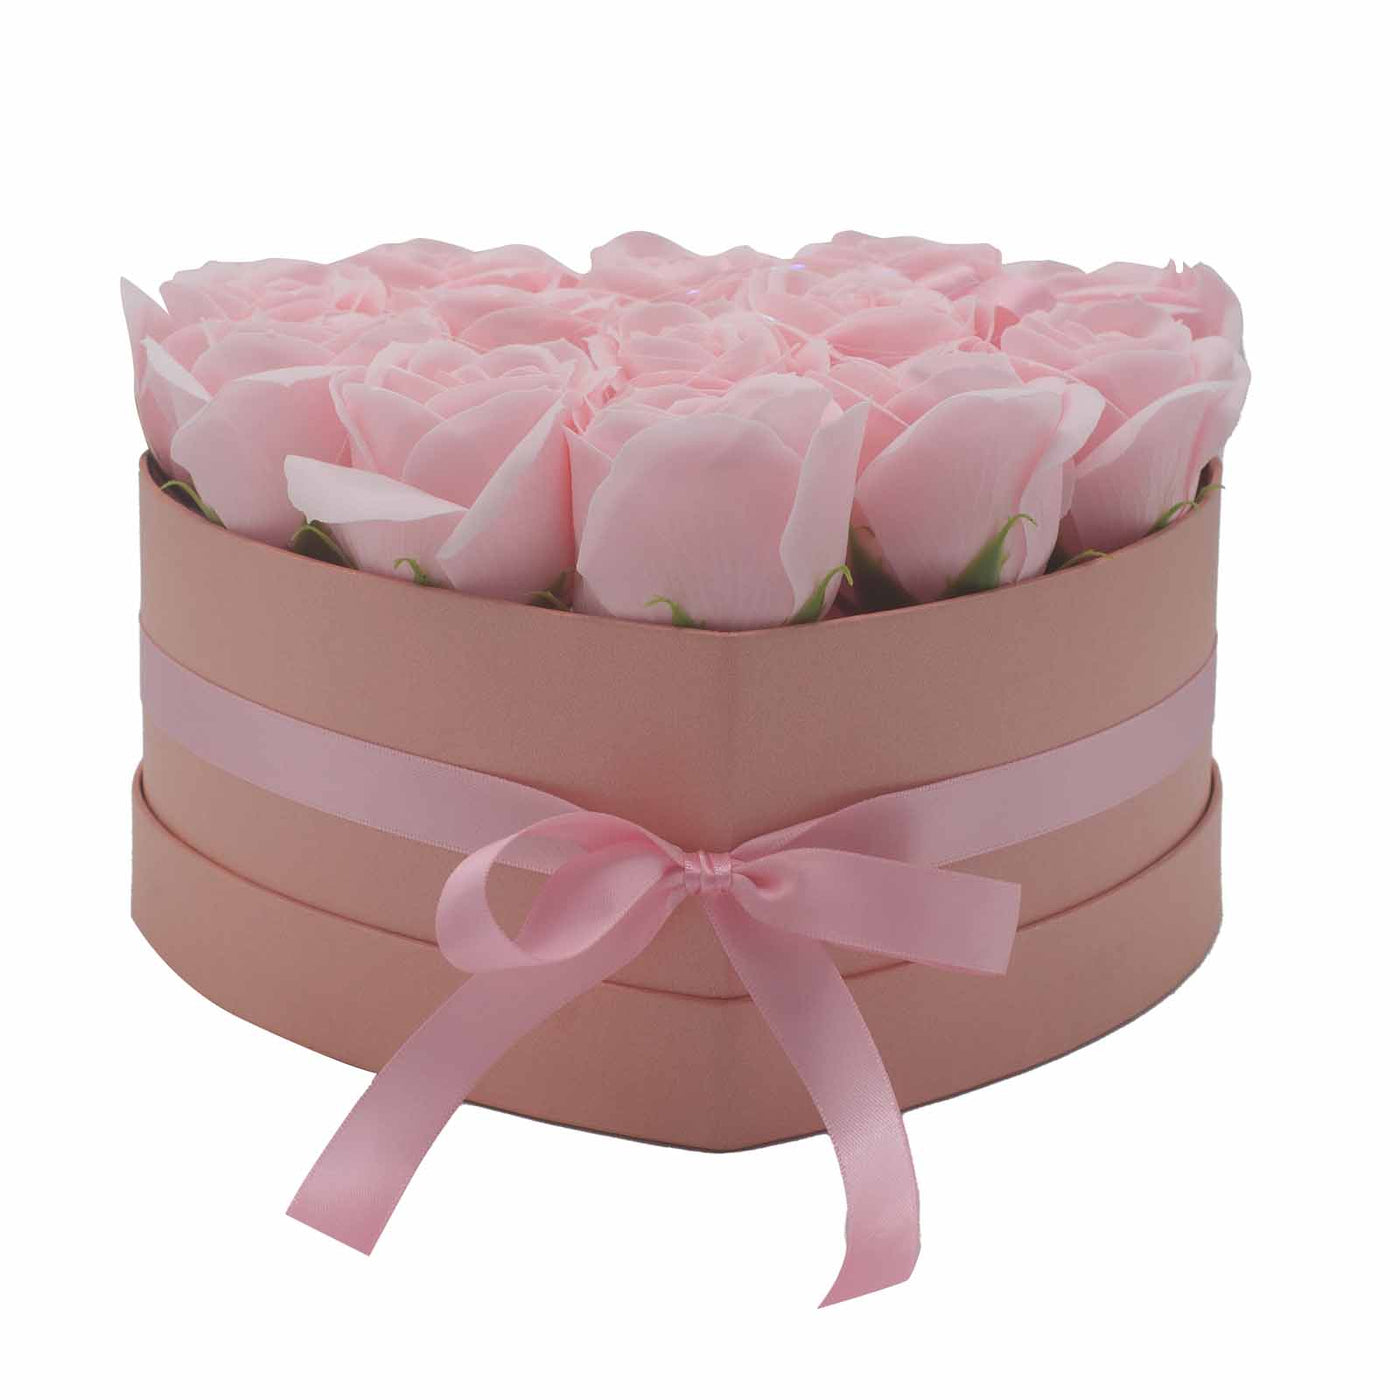 Body Soap Fragranced Flowers Gift Rose Bouquet - 13 Pink Roses In Heart Gift Box.